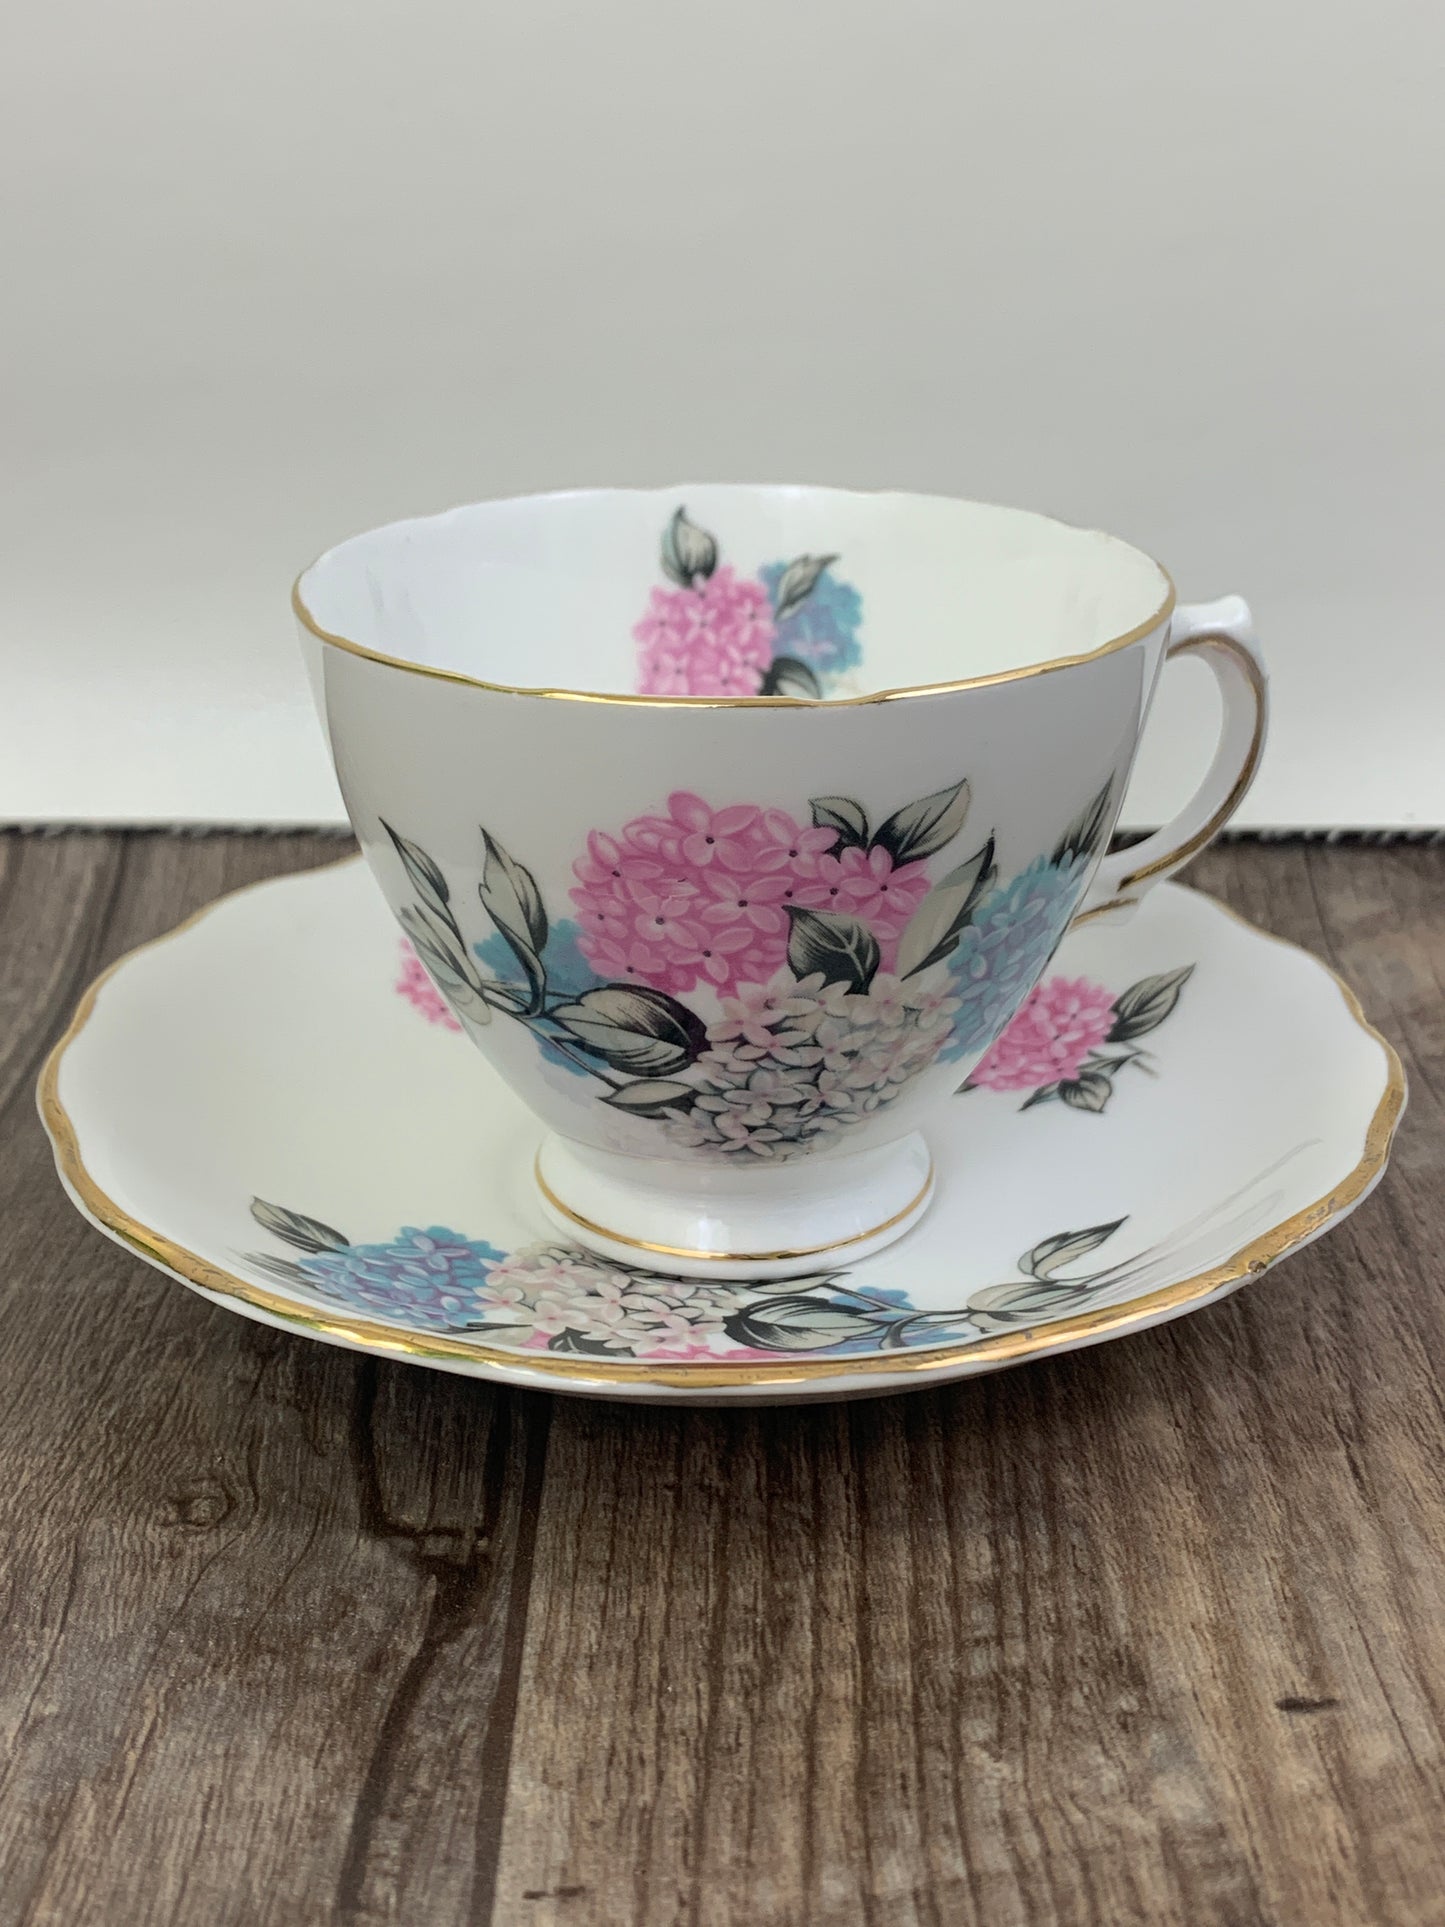 Vintage Teacup with Pink and Blue Hydrangeas